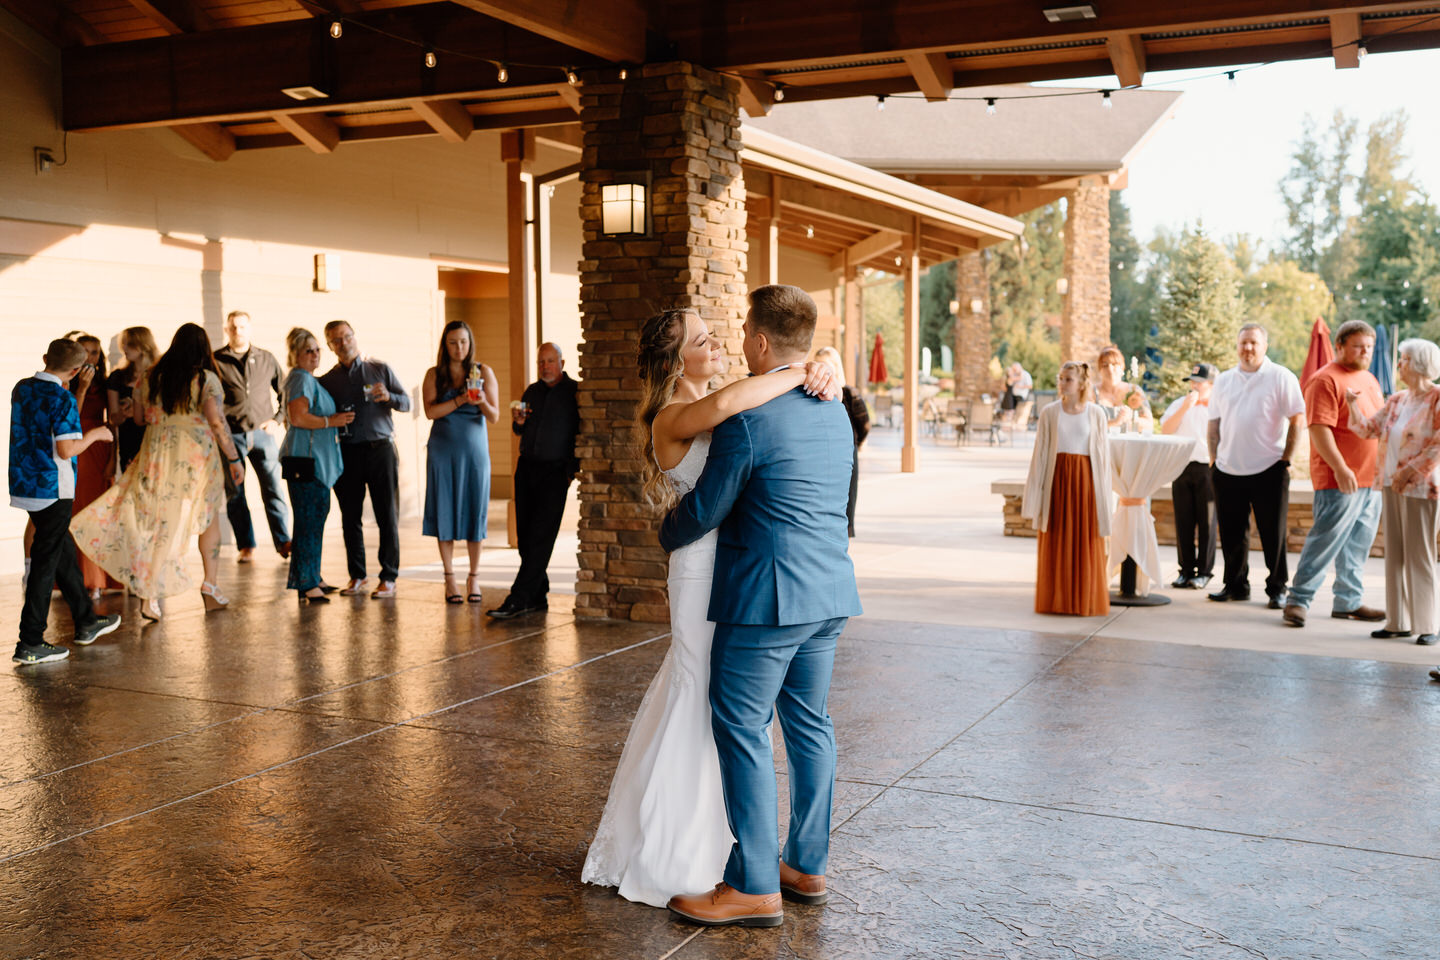 Bride and groom's first dance under the covered patio at shadow hills country club